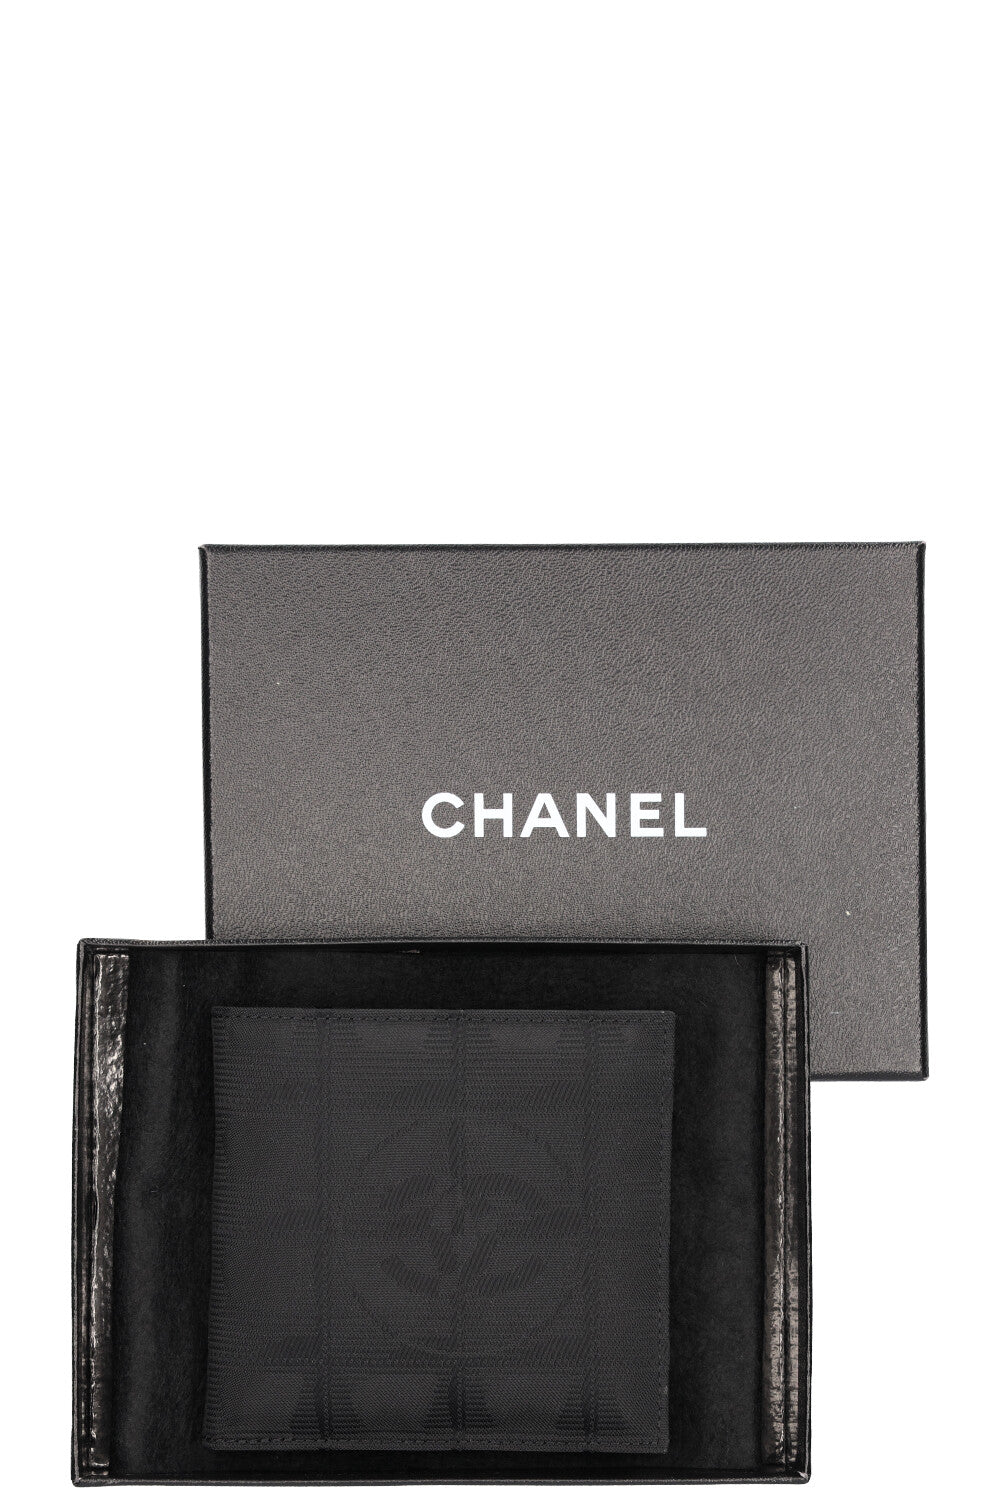 CHANEL Travel Line Portefeuille